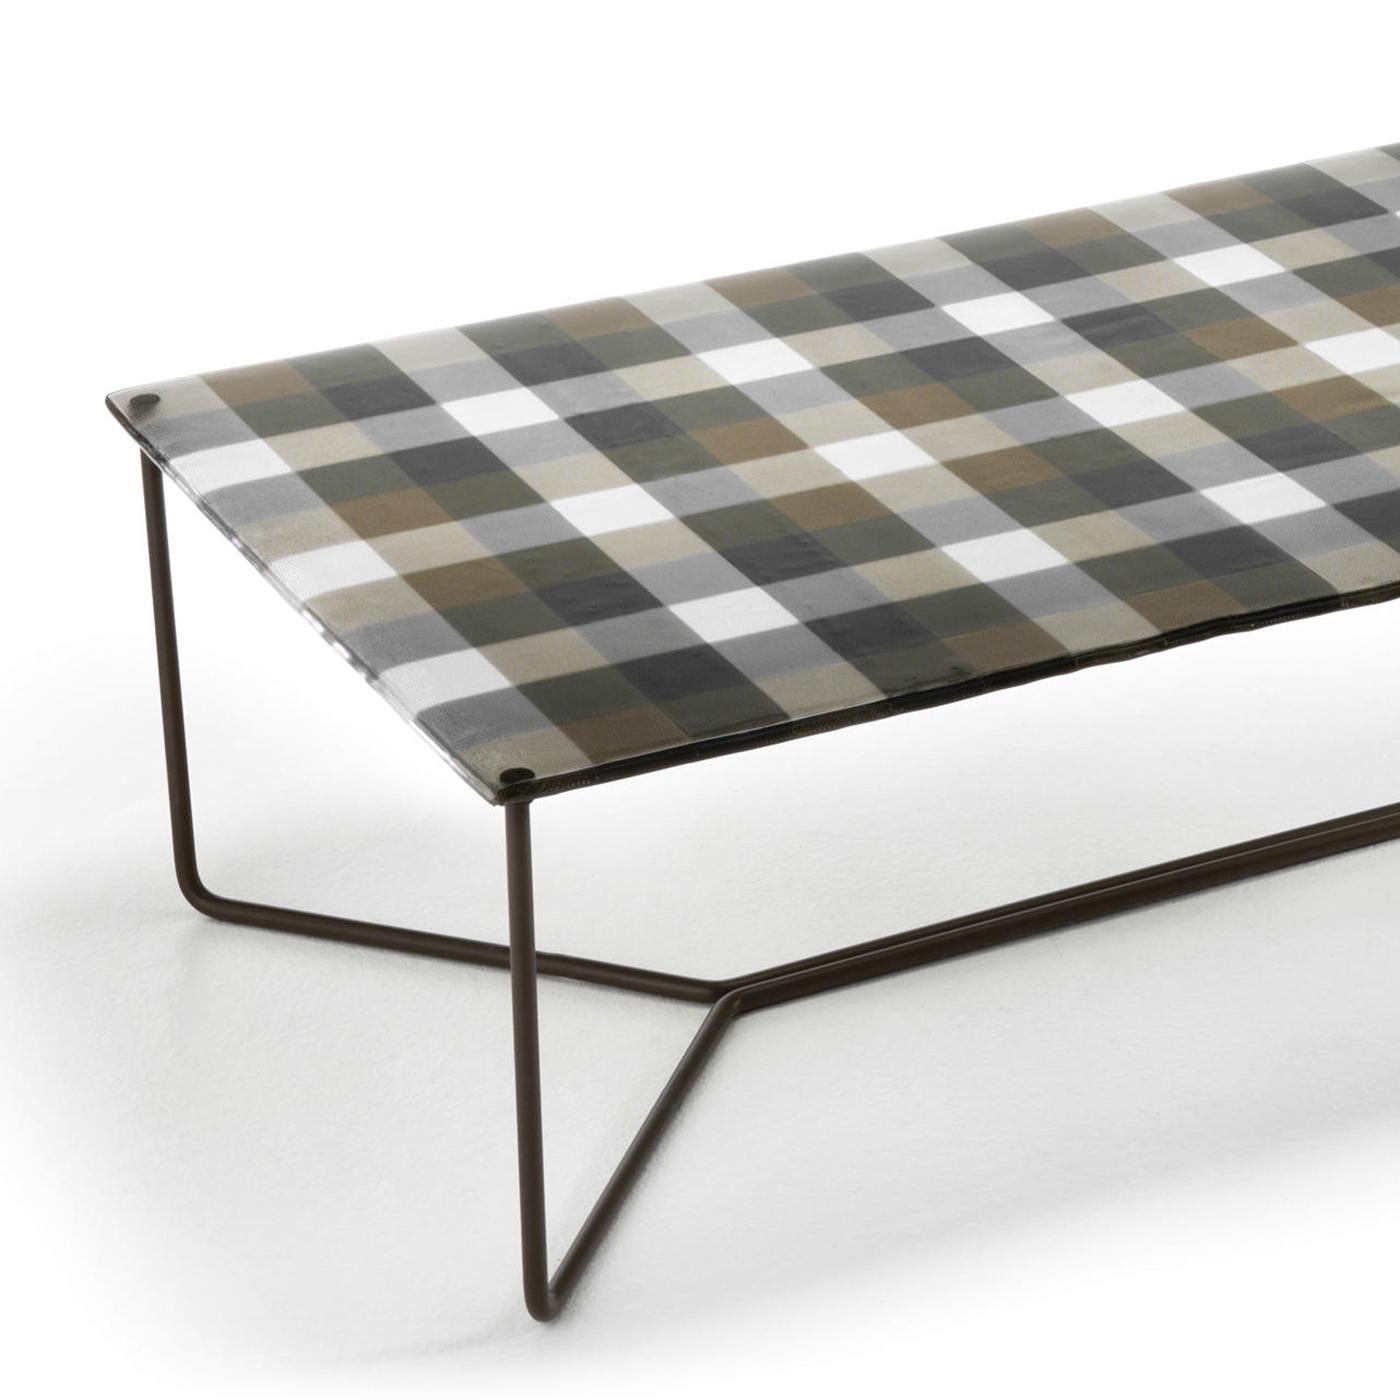 Coffee table Scottish with multicolored glass top
with tiles pattern and metal base opaque titanium finish.
Any slight trace and superficial depression, irregularity of
the perimeter and small air bubble inside the glass sheet
are distinctive